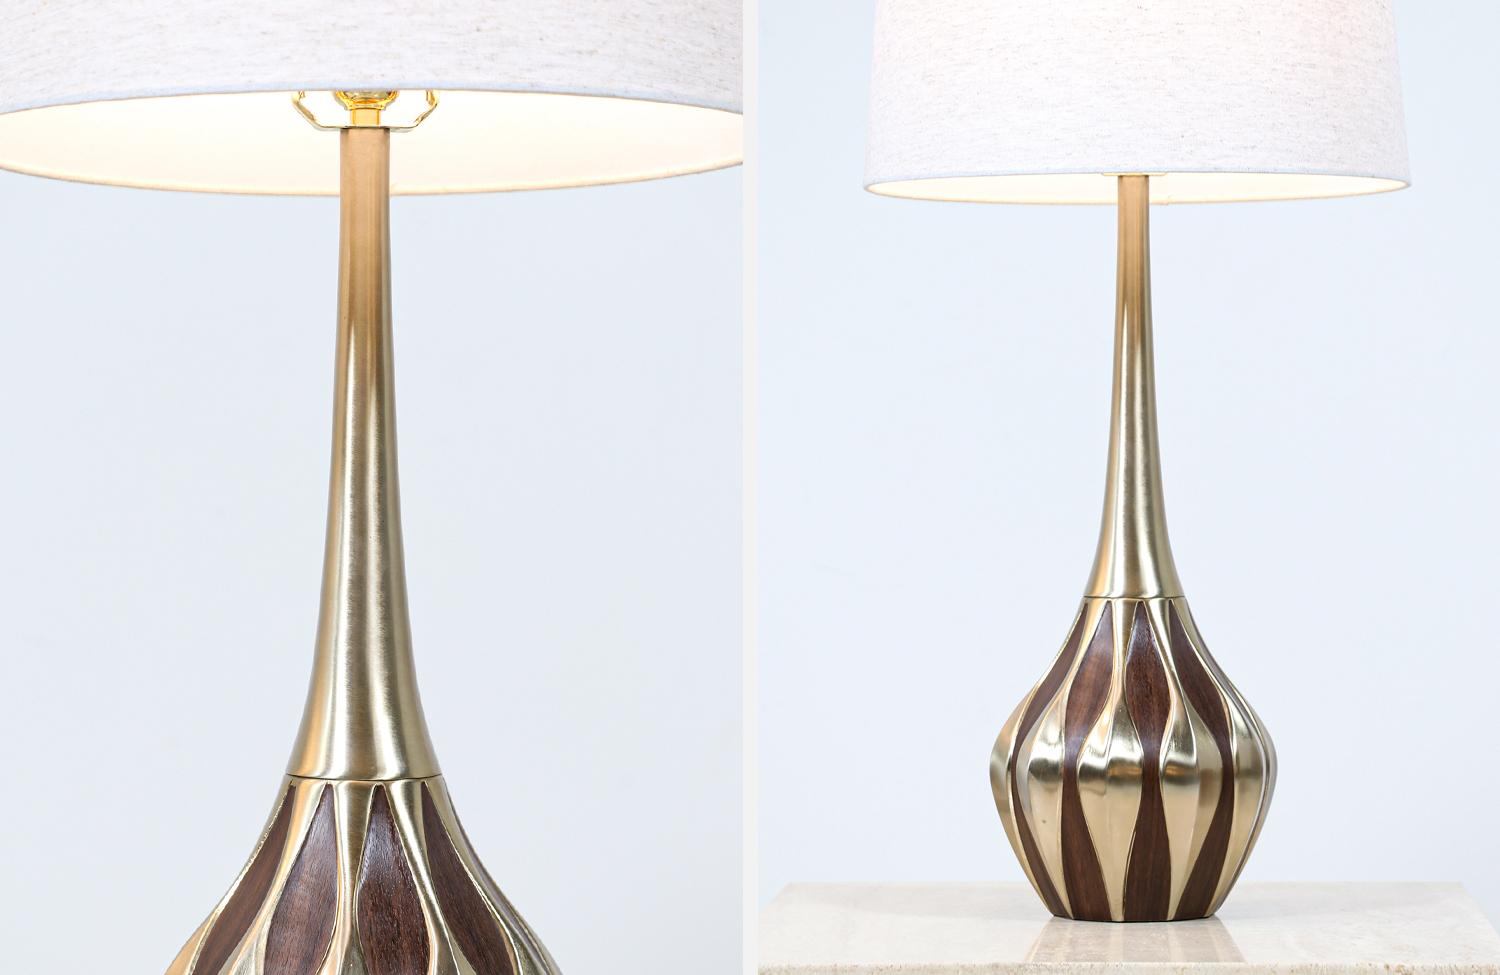 American Mid-Century Sculpted Brass Tables Lamp by Laurel